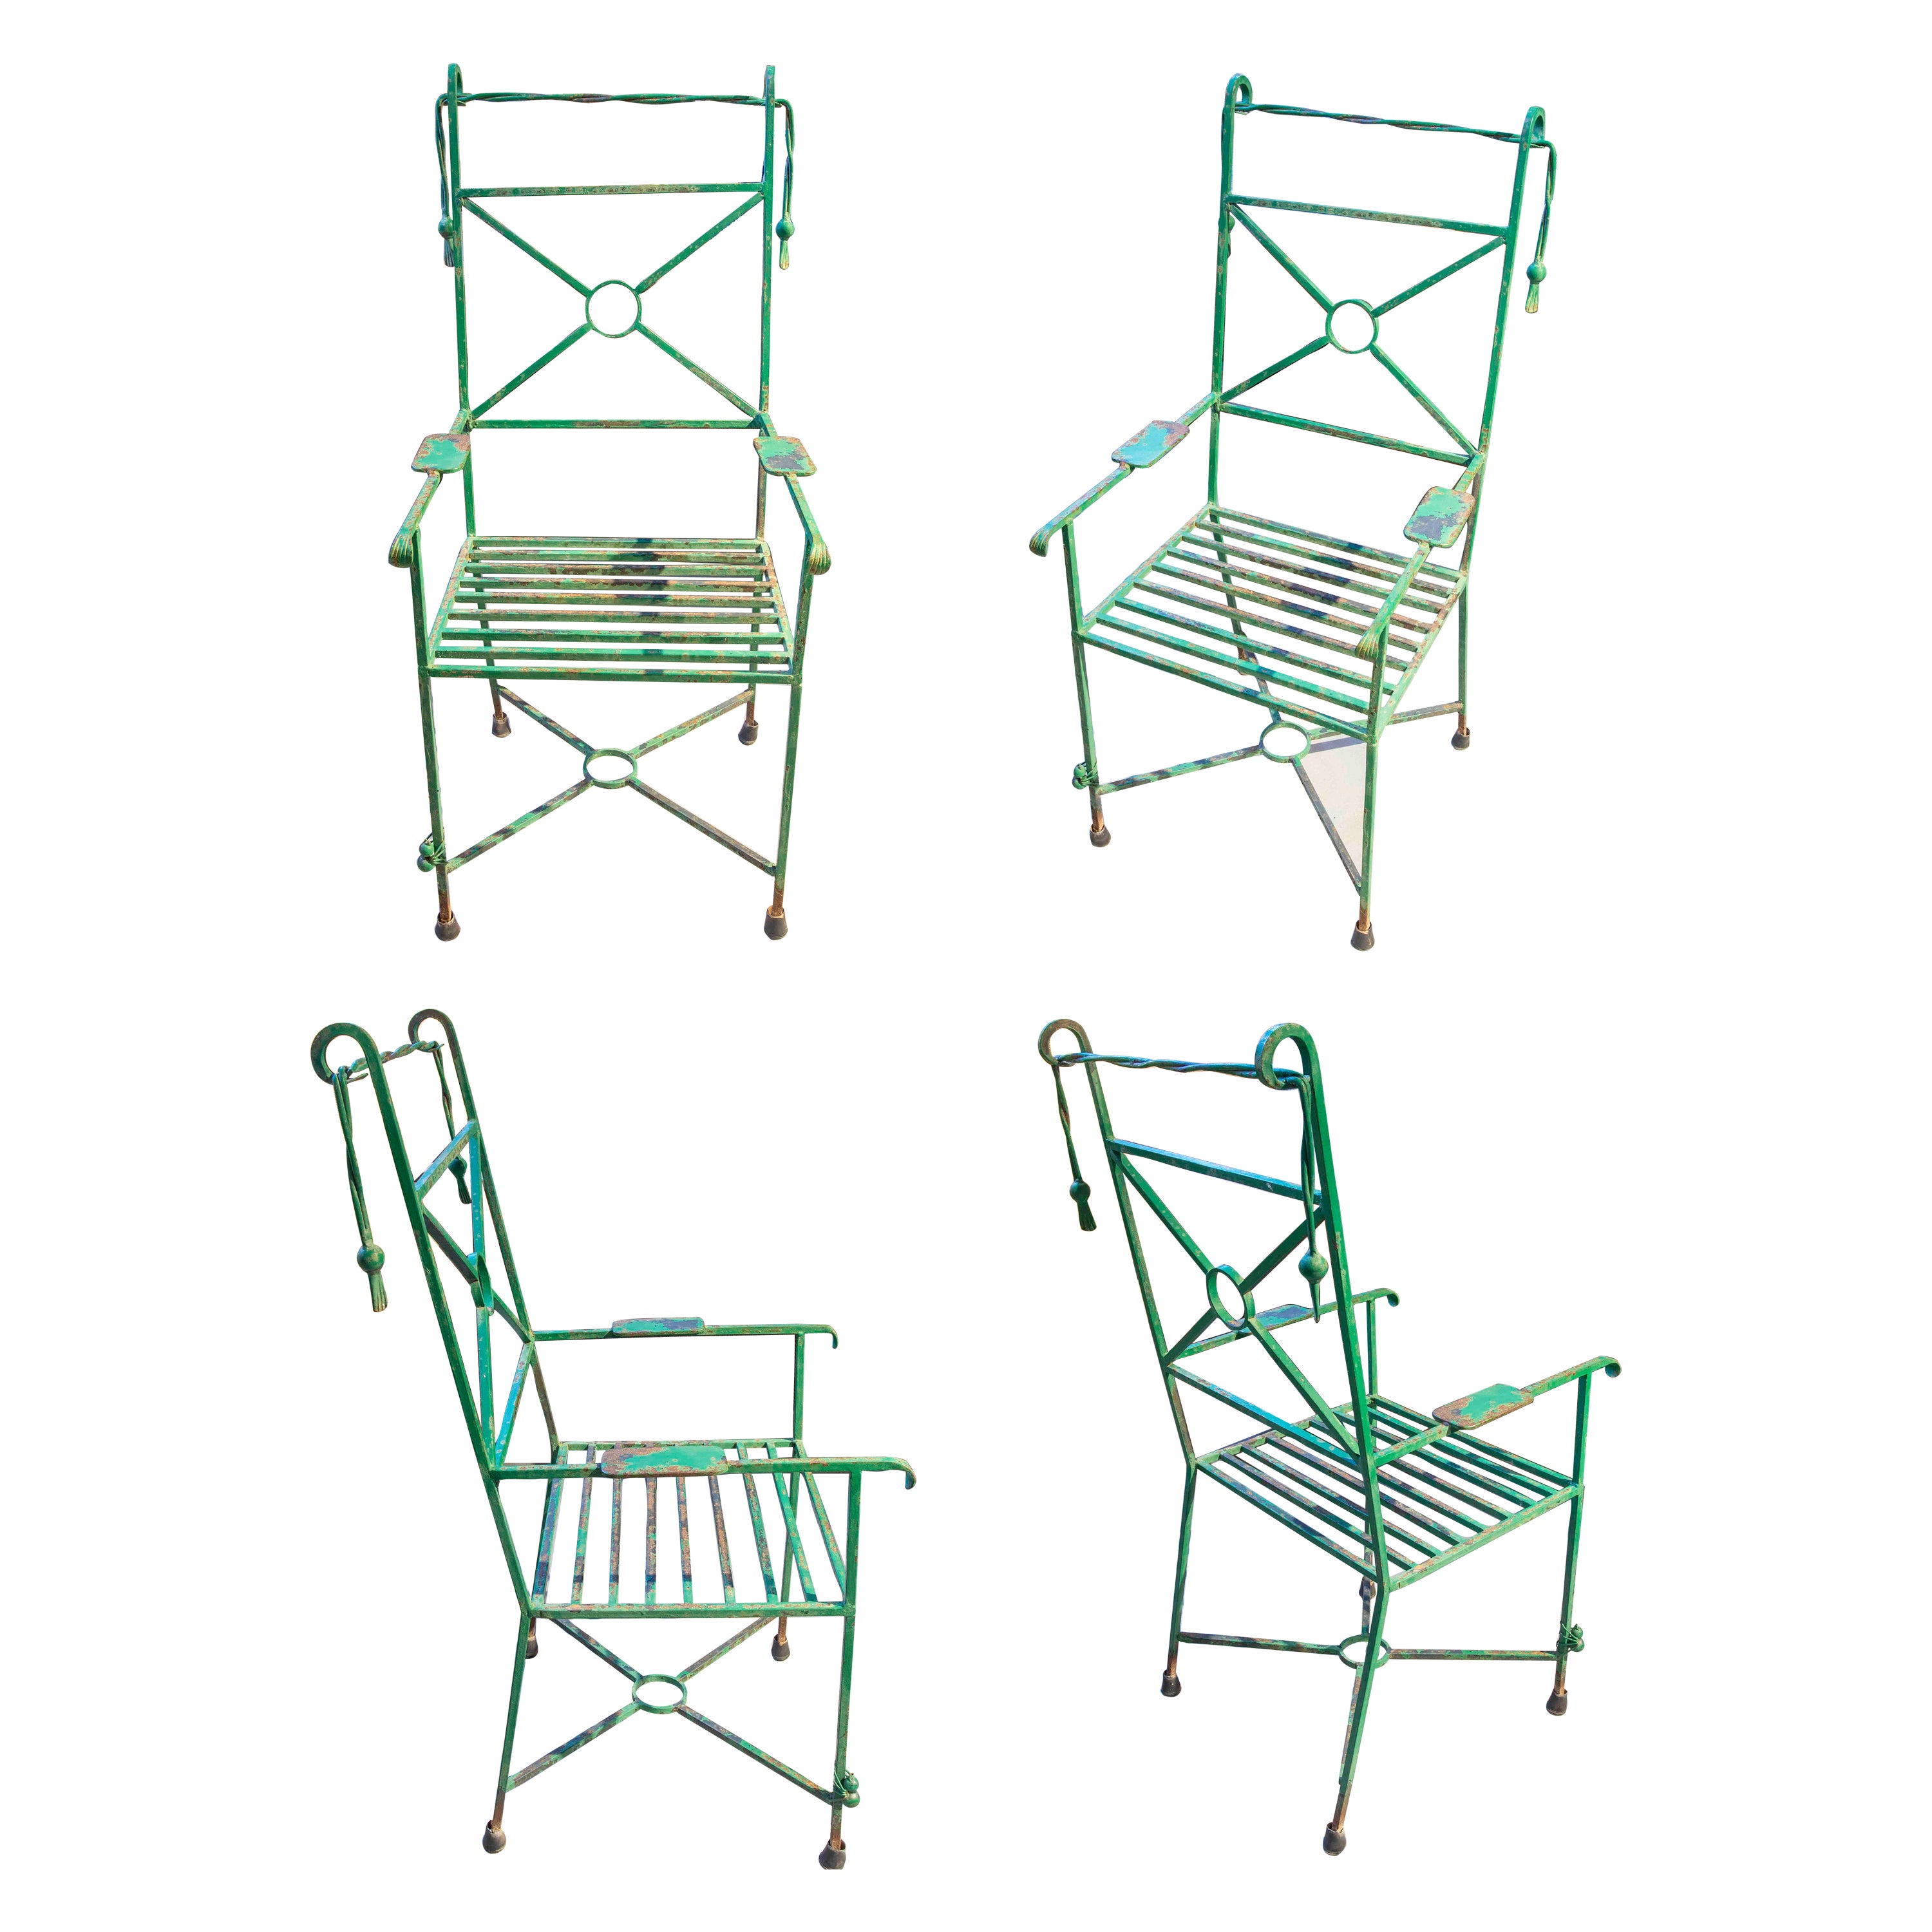 Four Green Painted Iron Chairs with Ants Decoration on the legs